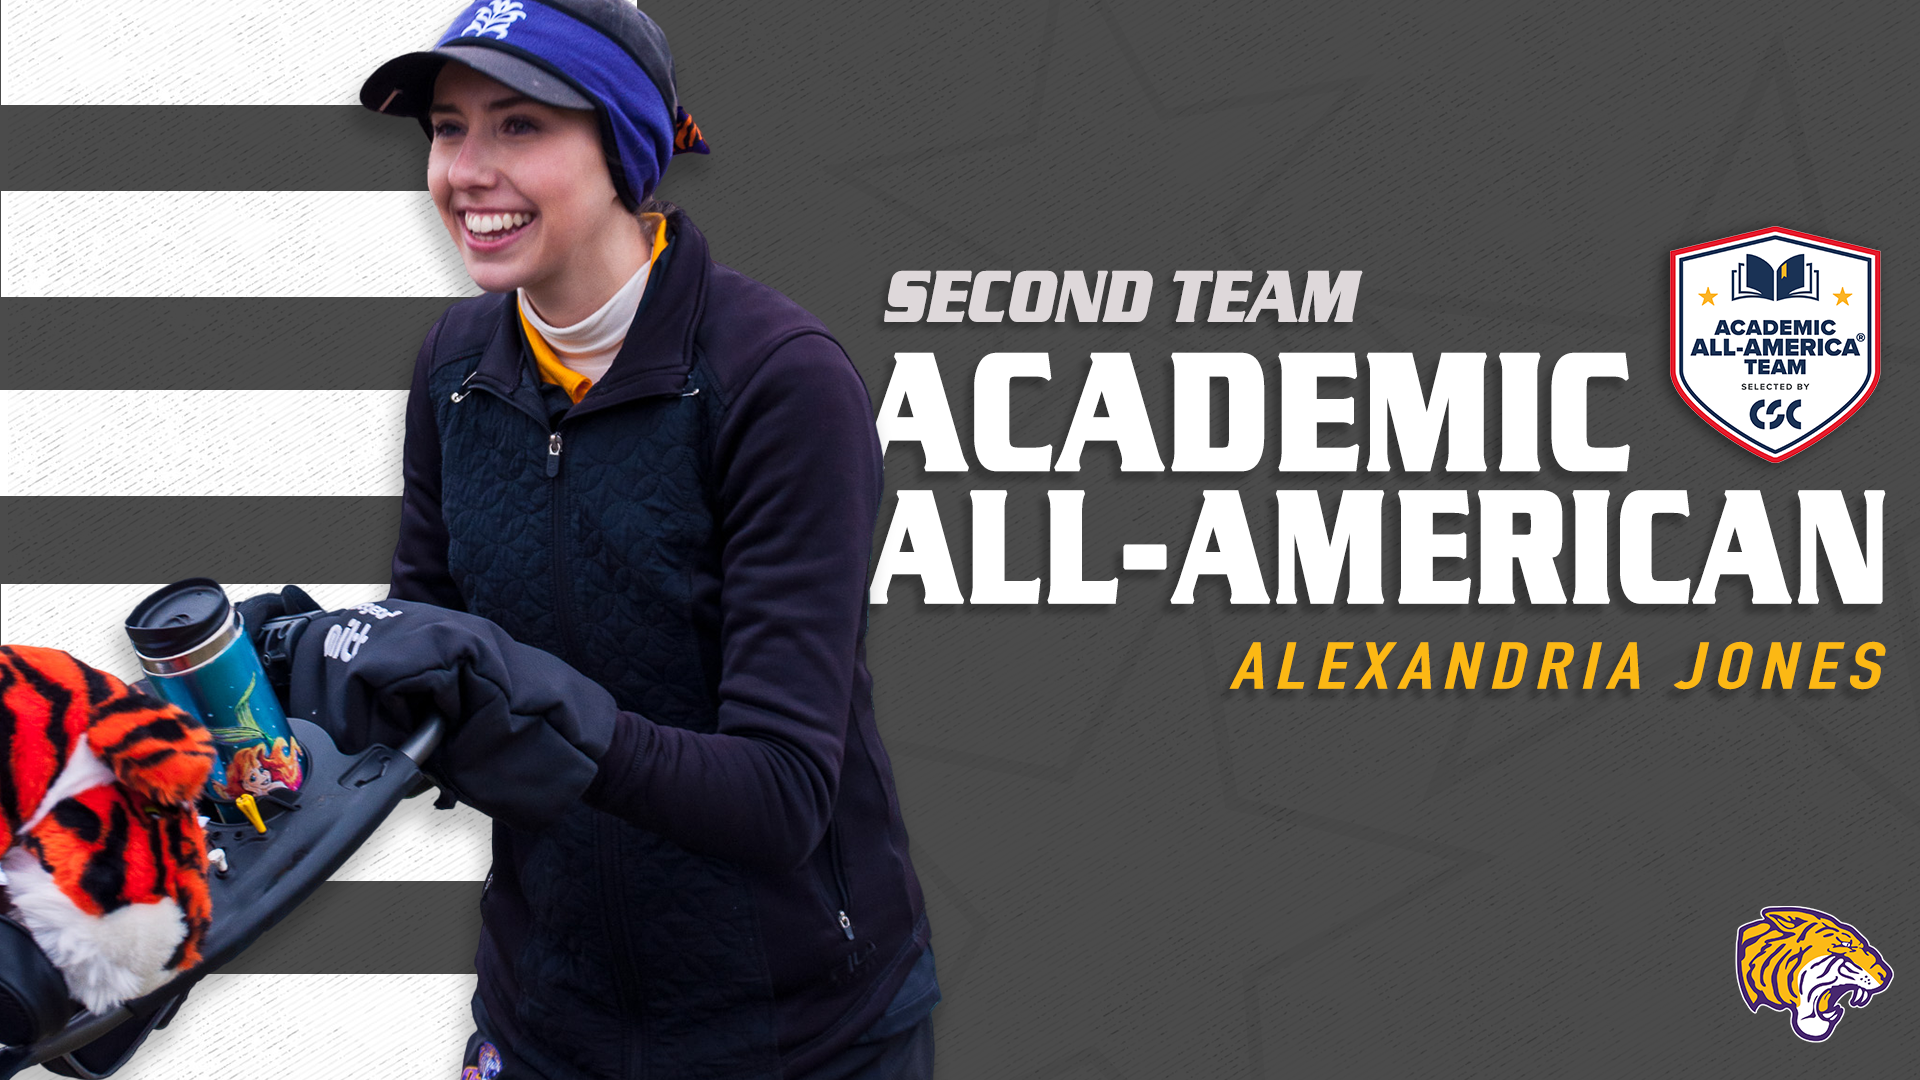 JONES NAMED TO CSC ACADEMIC ALL-AMERICA SECOND TEAM